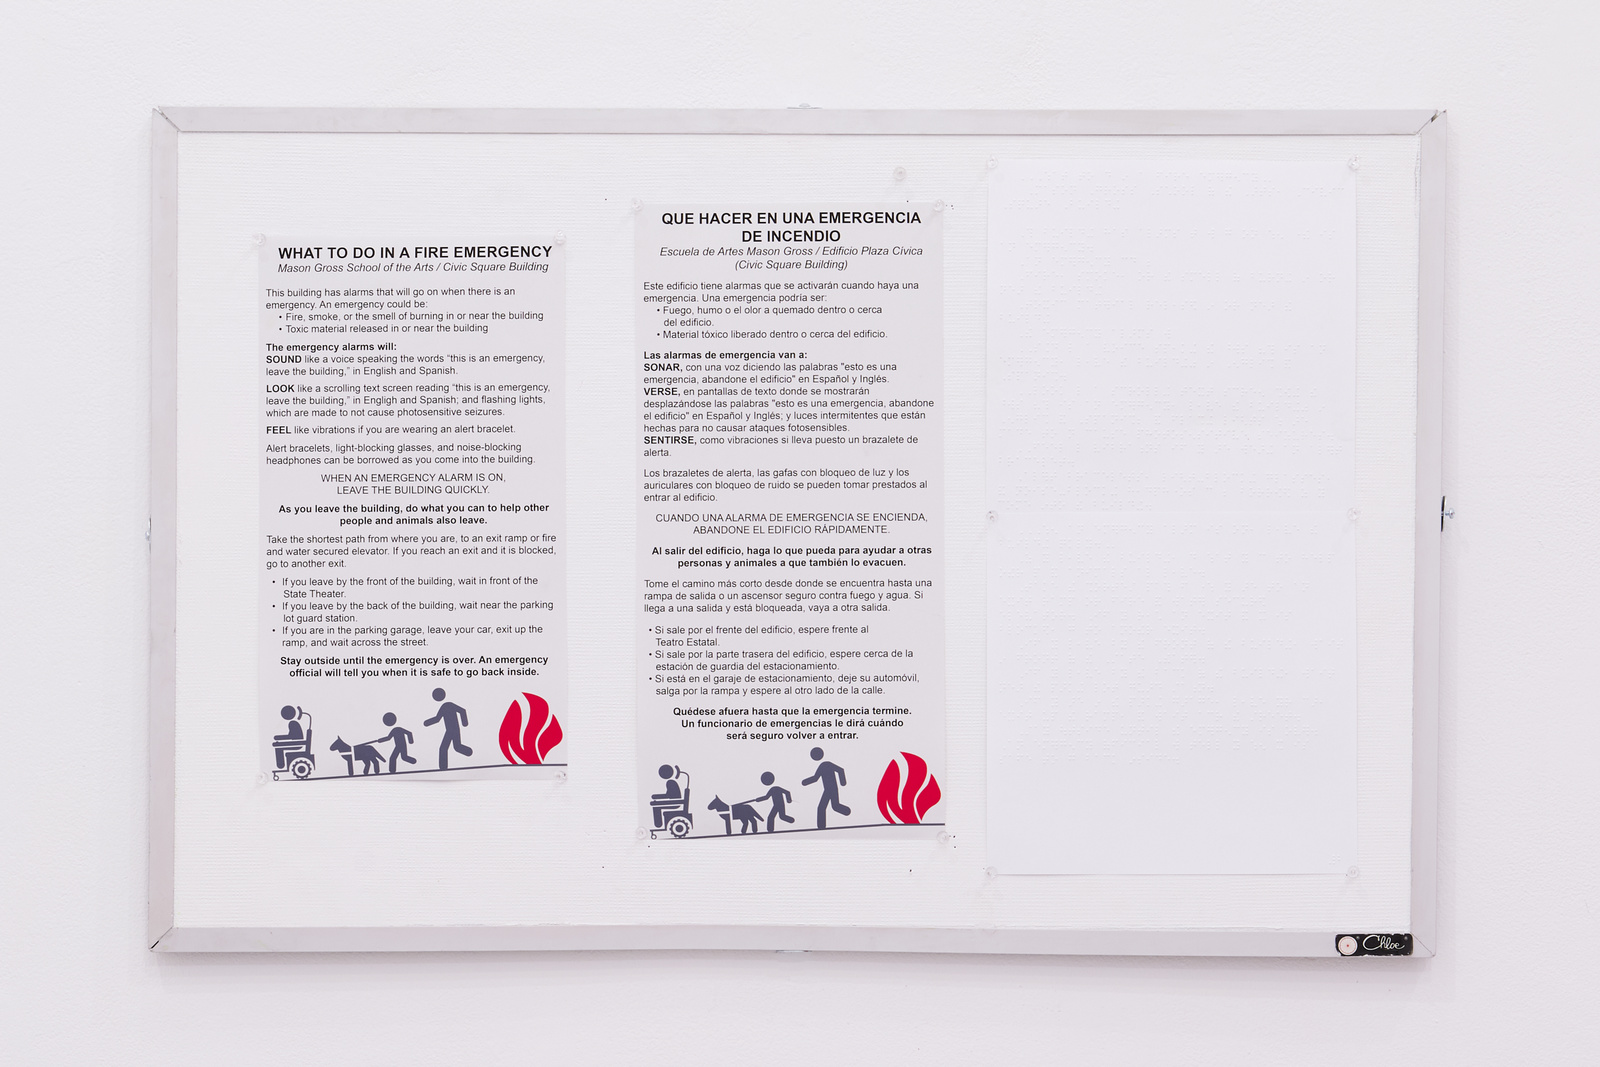 Printed and embossed text in English, English Braille, and Spanish
        on vin-tak bulletin board used by Rutgers University.
        Text is proposed instructions for evacuting the building, and an
        illustration in the style of ISO-graphics of a person using a powerchair,
        a person of short stature holding a
        dog wearing a harness, and a taller upright person, fleeing down a
        ramp away from flames. There is a sticker on the lower right corner of aluminum frame of the bulletin board.